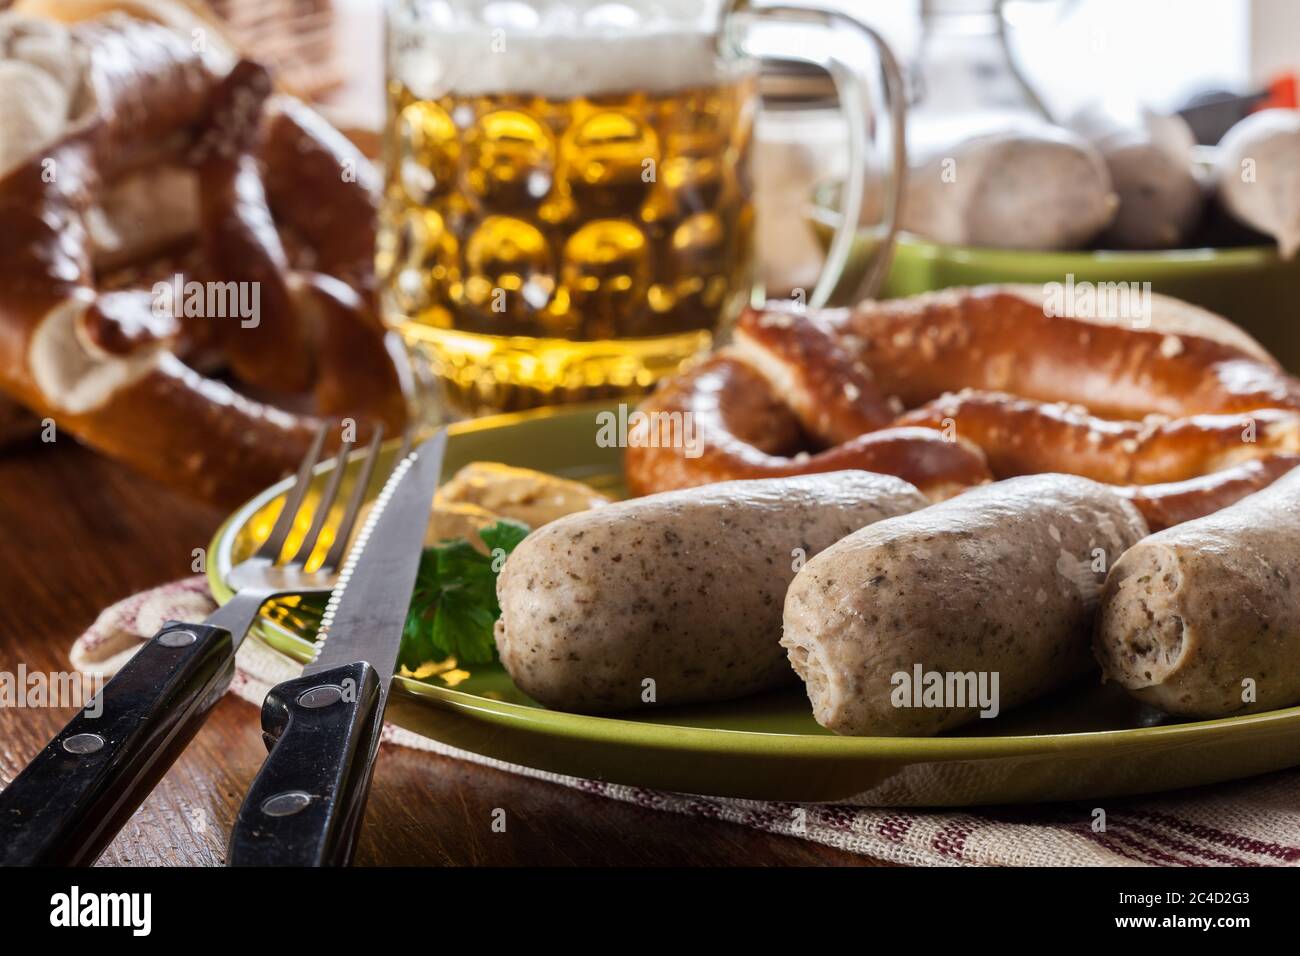 Bavarian breakfast with white sausage, pretzel and beer Stock Photo